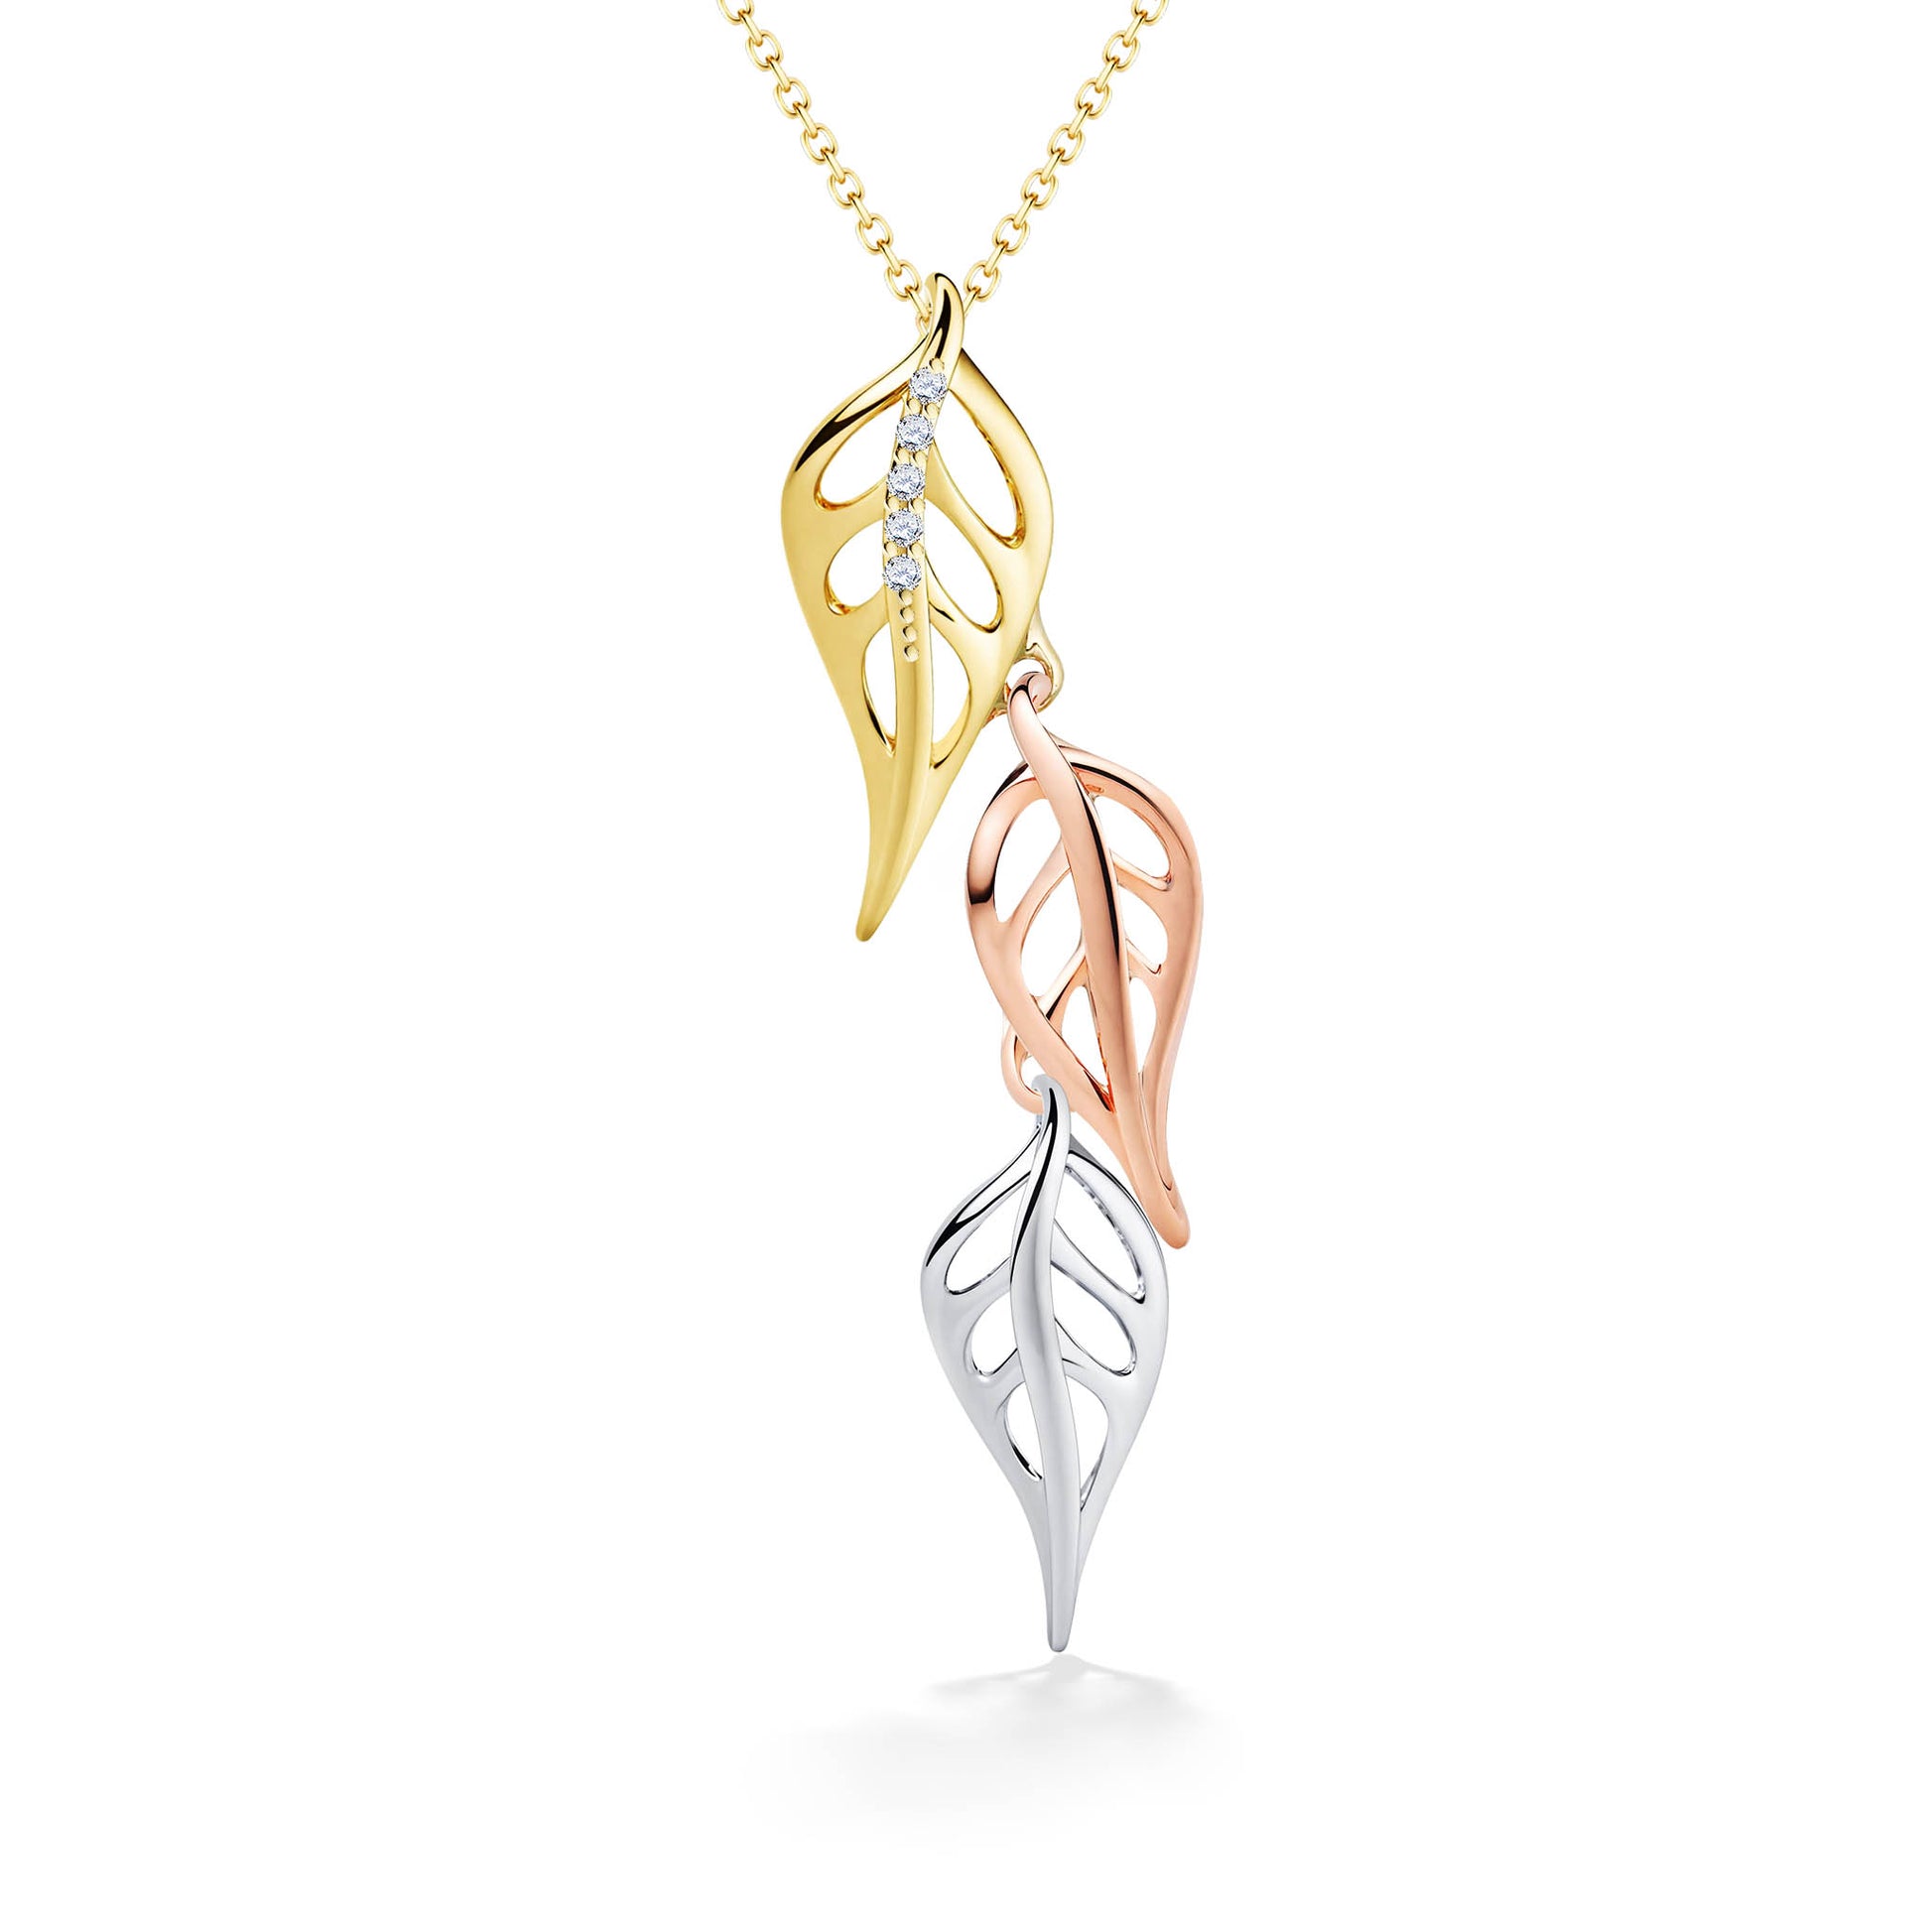 44676 - 14K Rose Gold, 14K White Gold and 14K Yellow Gold - Maile Leaf Drop Pendant